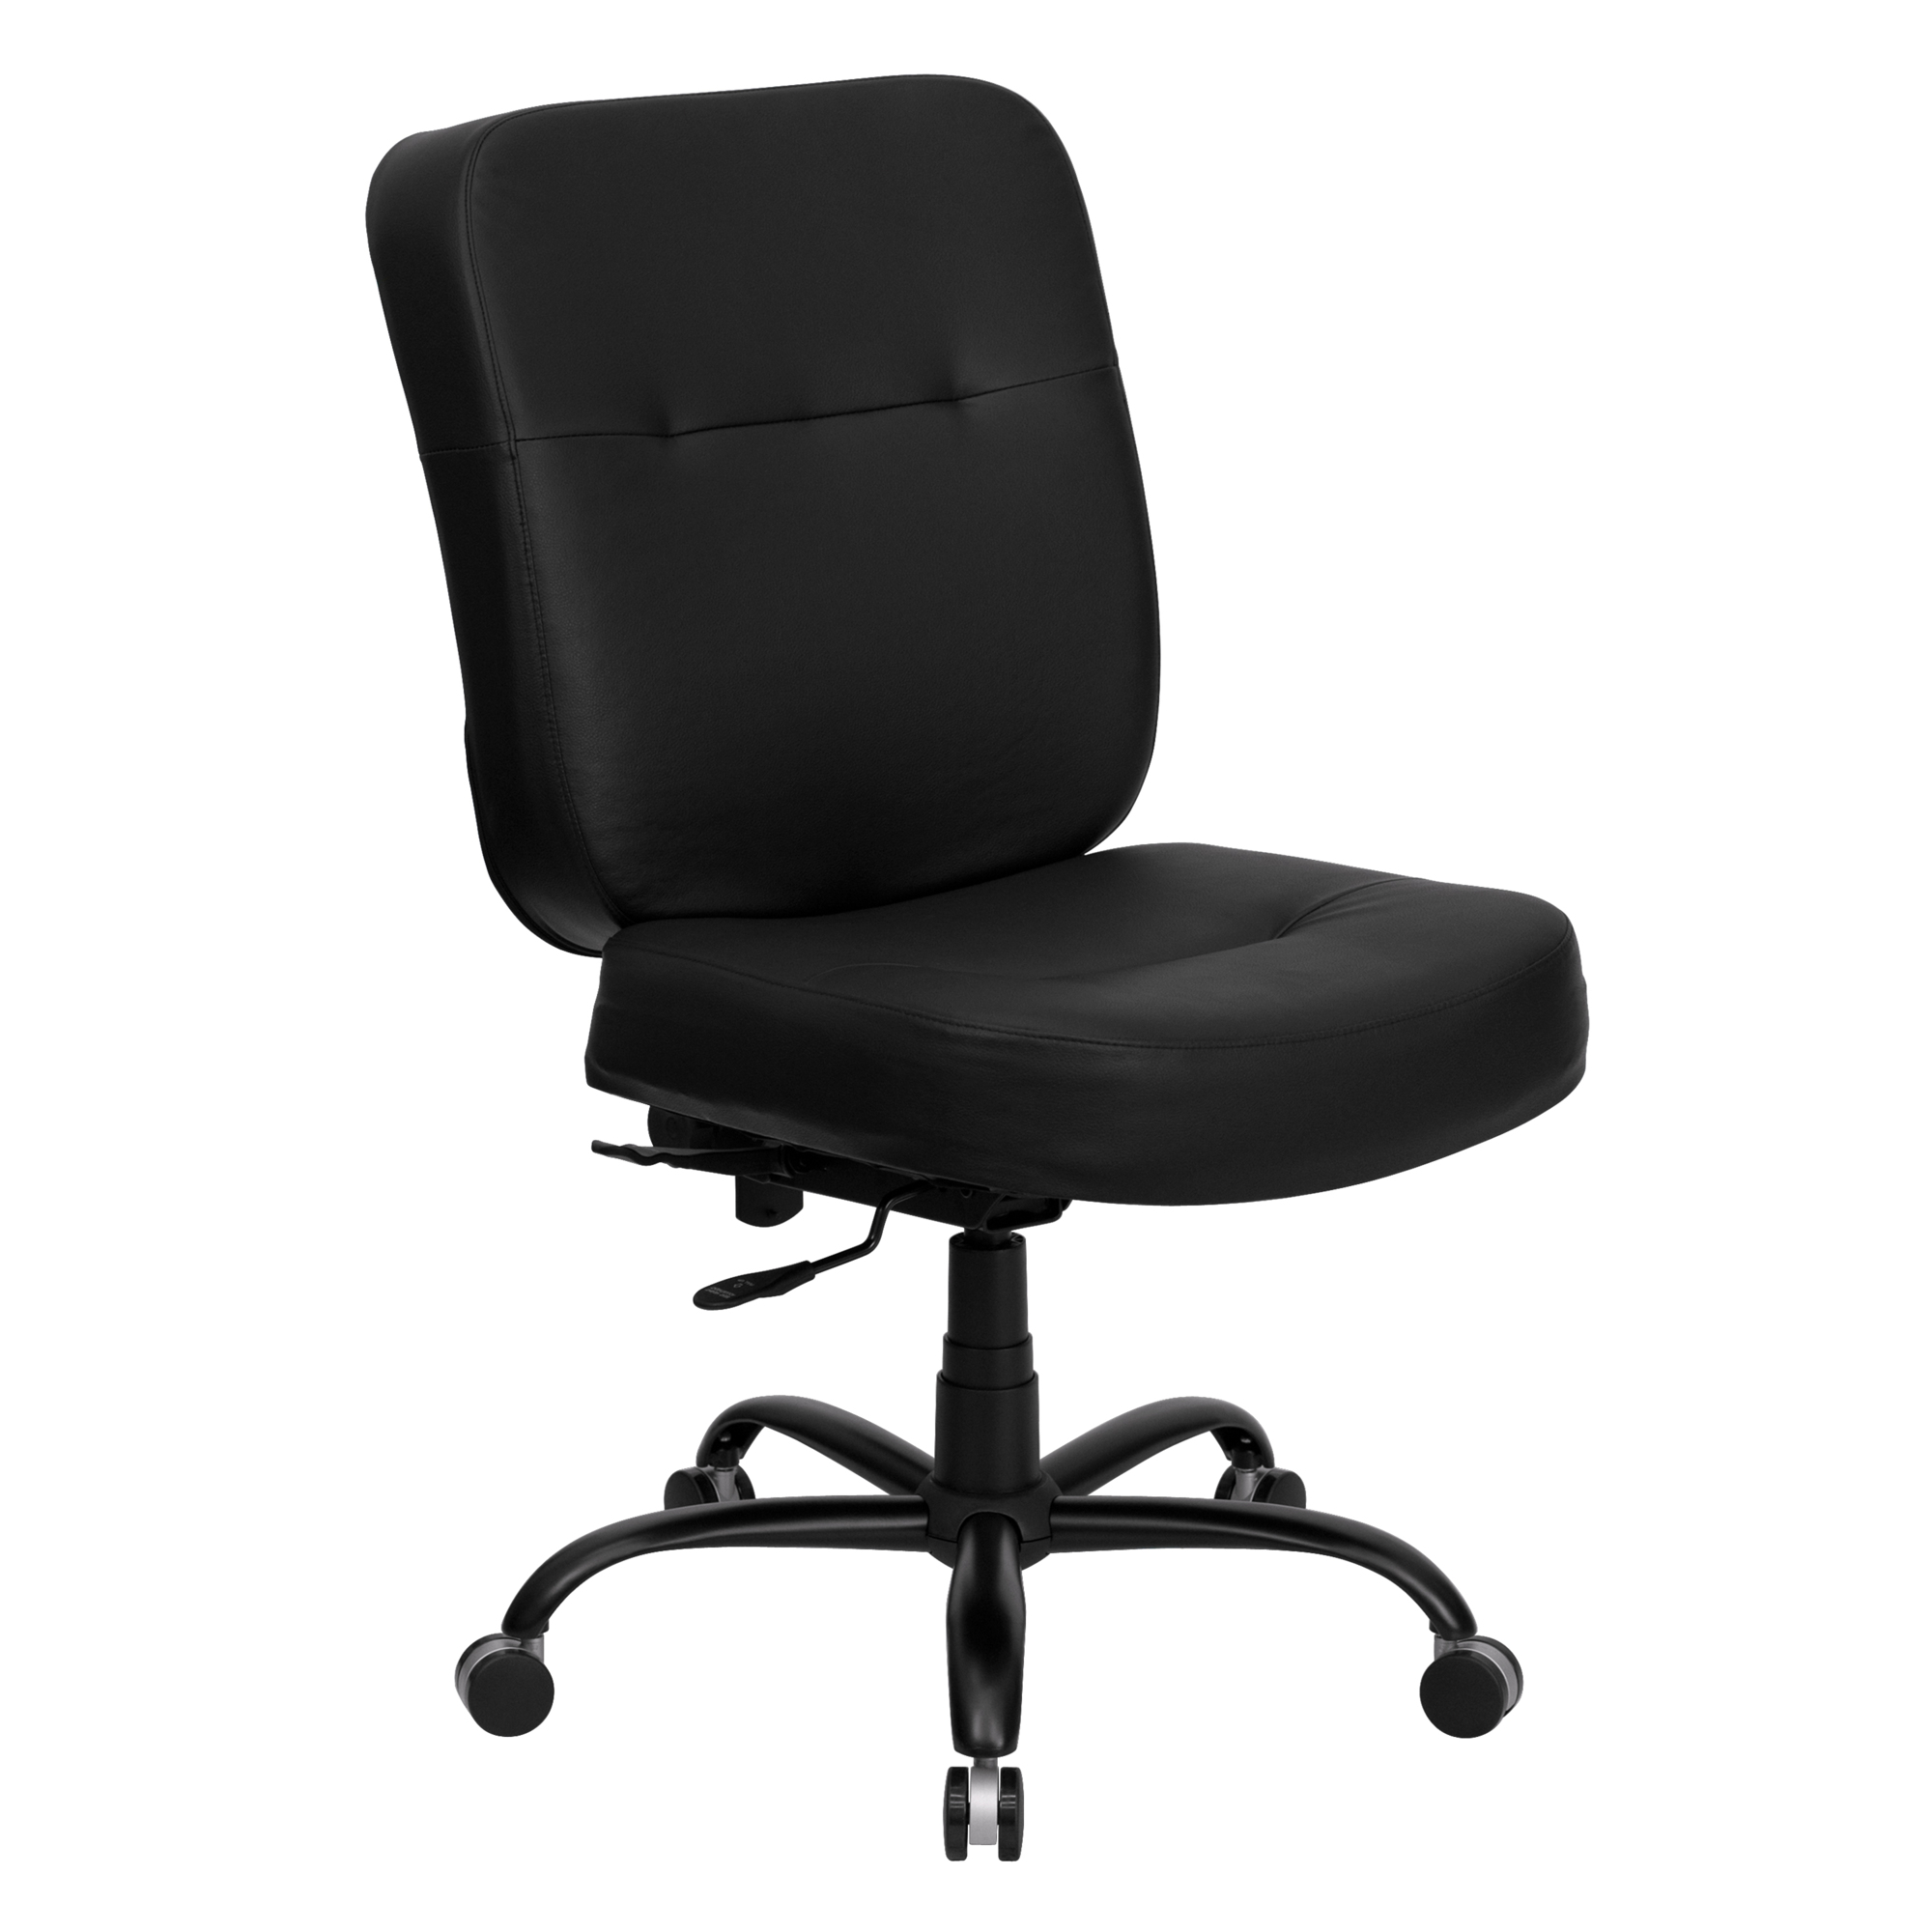 Flash Furniture, 400 lb. Rated High Back Black LeatherSoft Chair, Primary Color Black, Included (qty.) 1, Model WL735SYGBKLEA